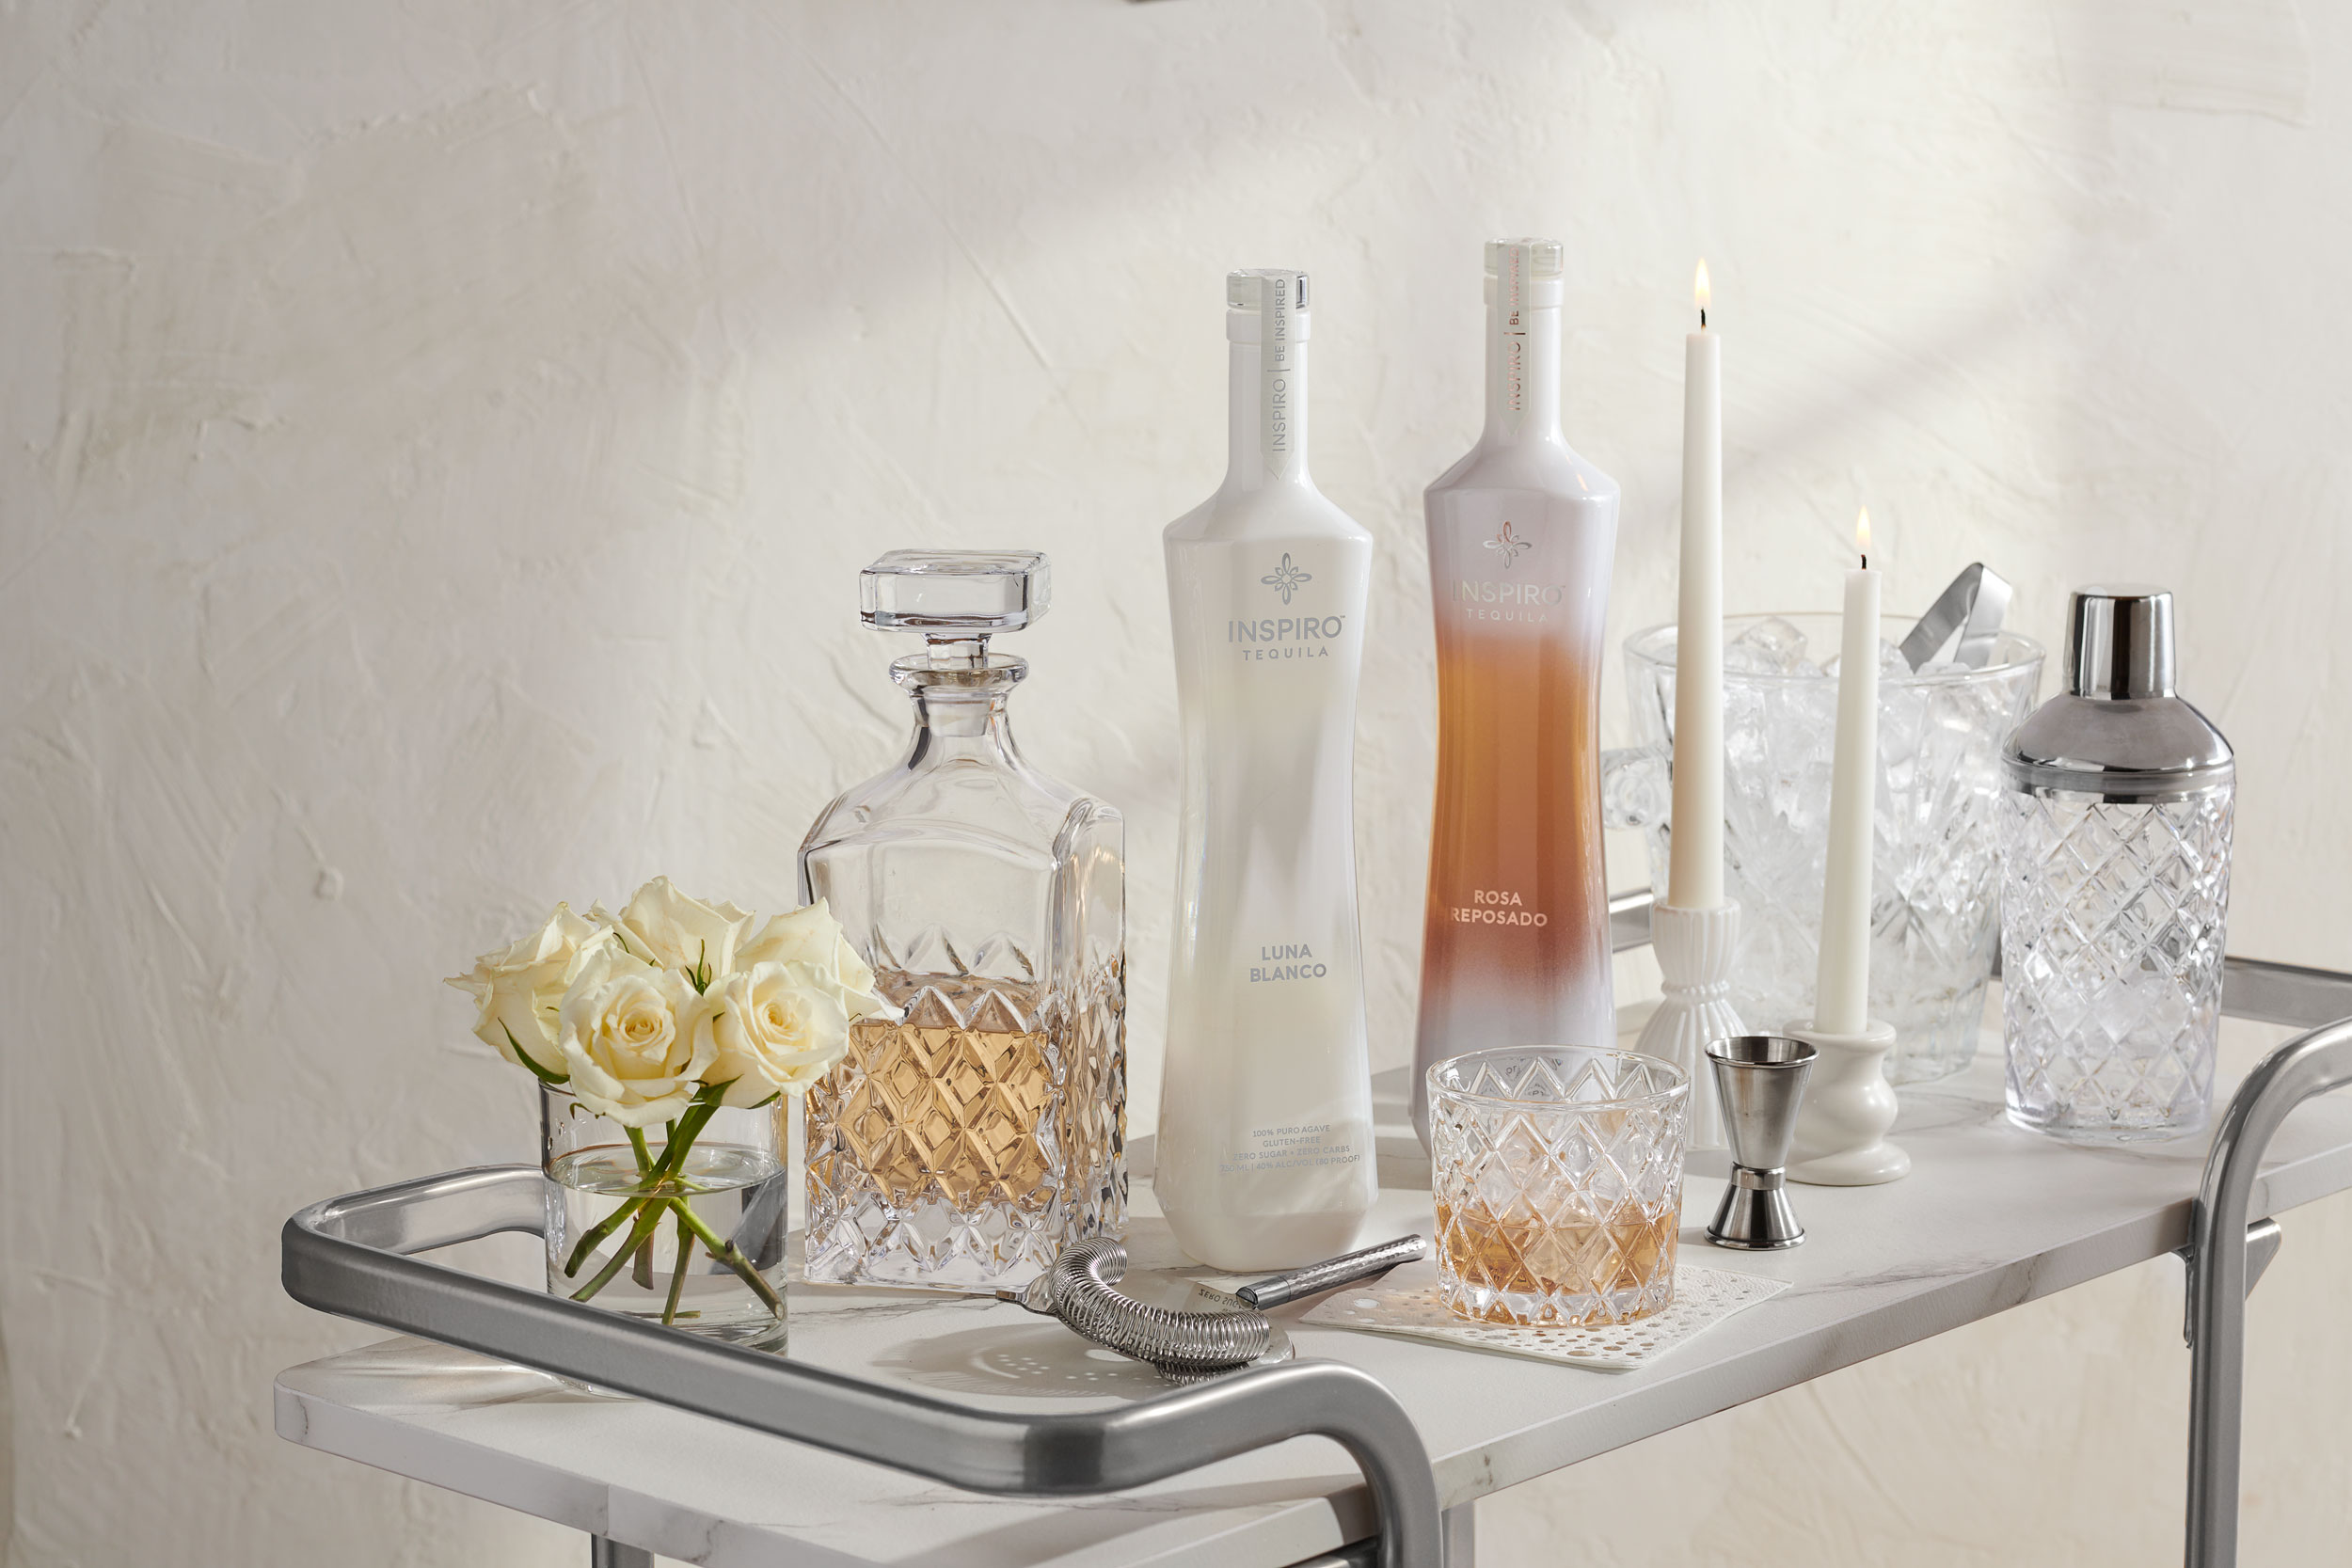 Styled bar cart with bottles of tequila and beverage accessories